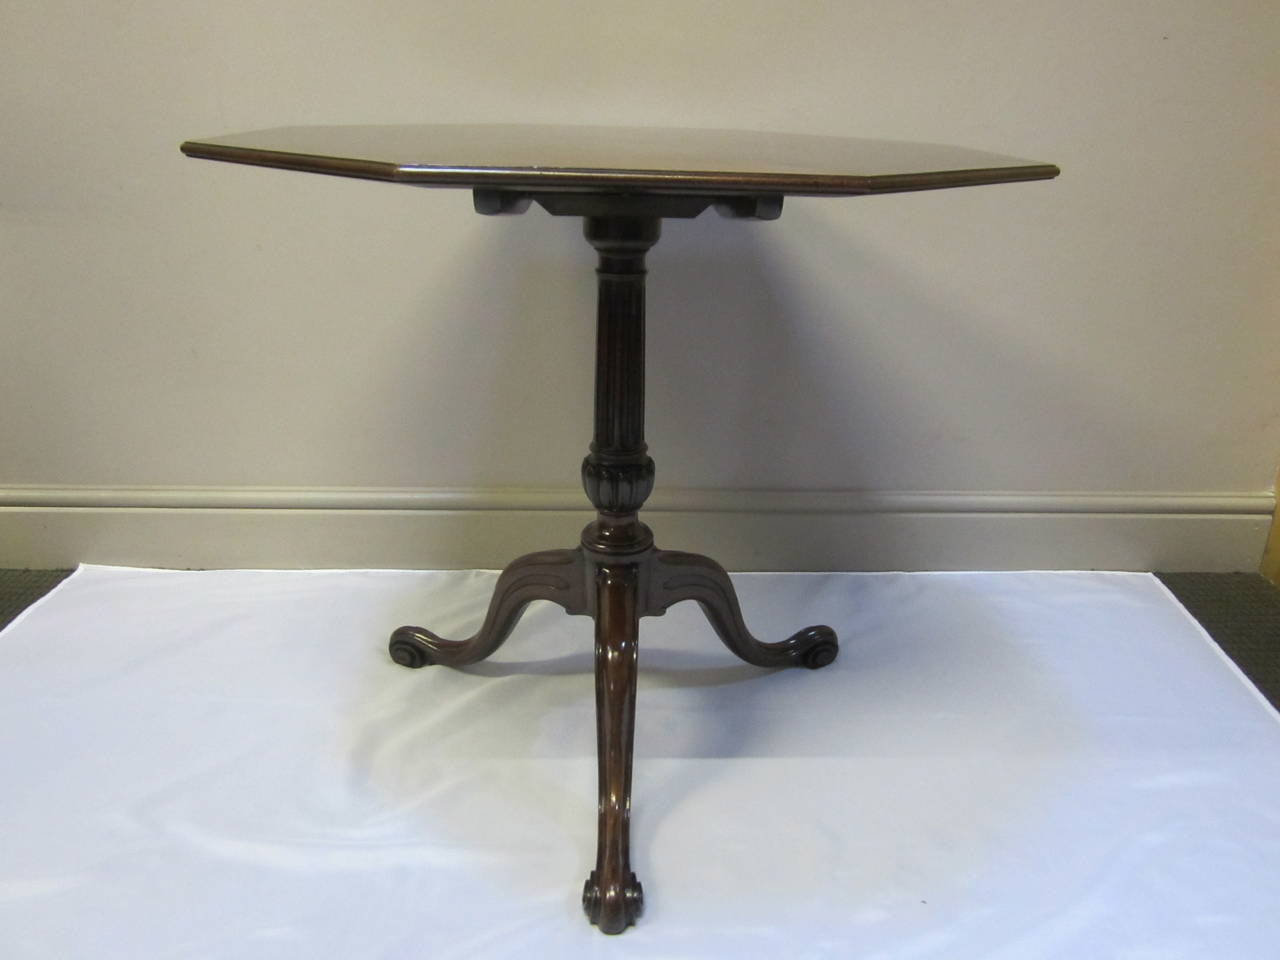 Rare 18th century mahogany octagonal tripod table attributed to Thomas Chippendale, the octagonal radial veneered segmented top, laid over solid mahogany with a lipped edge, set on a square tilting block set between two parallel bearers, the tilting